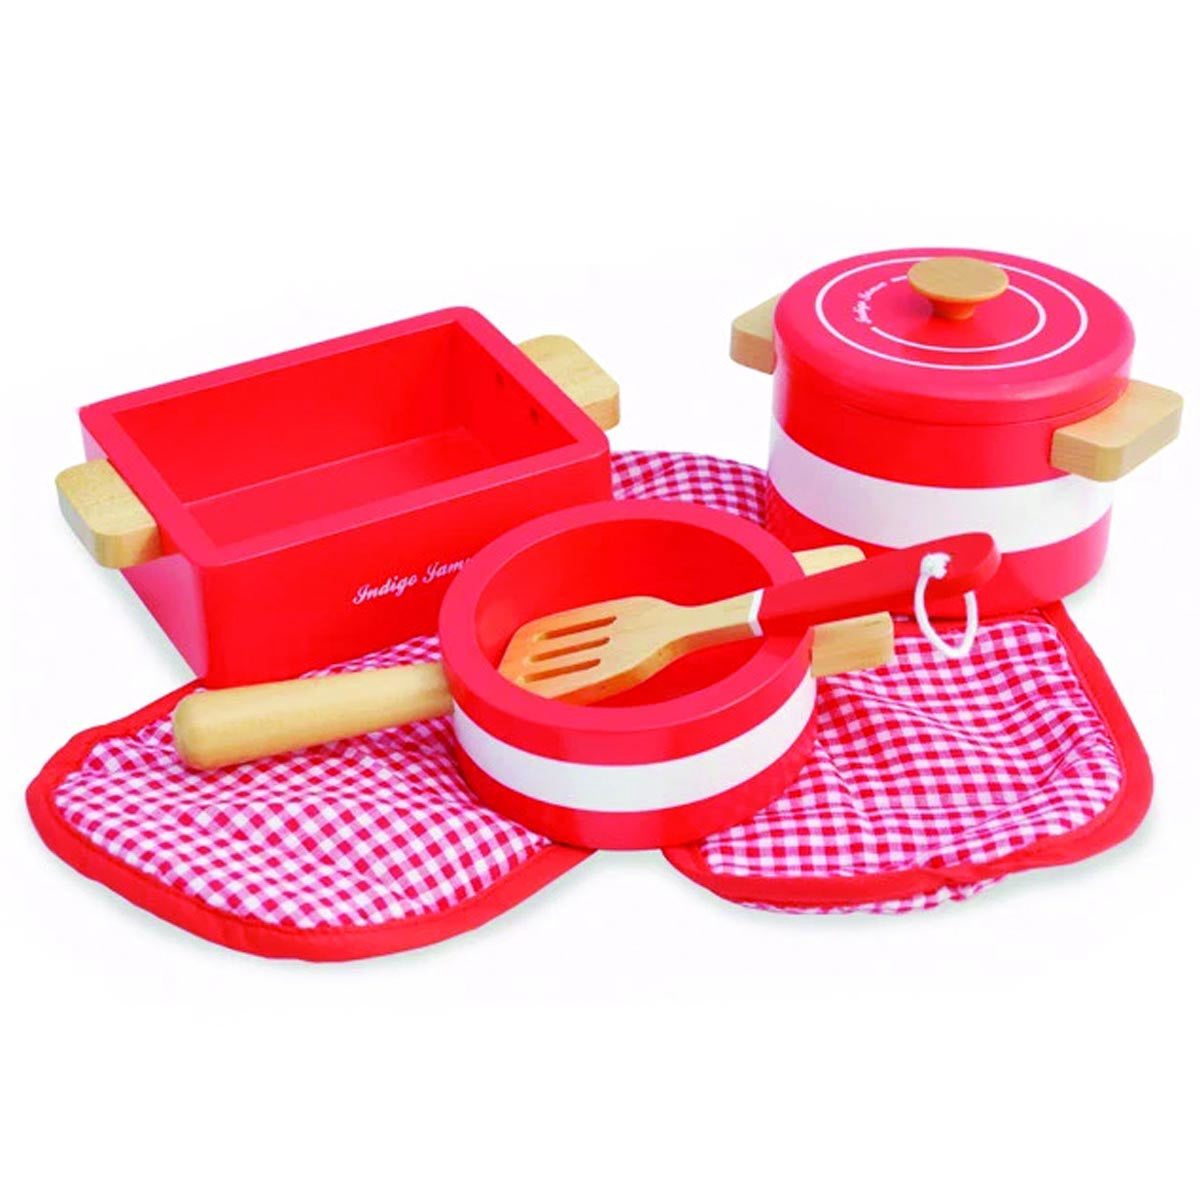 Deer Industries Wooden Toy Kitch Set Red. Pots and pans for kids kitchen. Stimulate imaginary play for toddler boy or girl. 